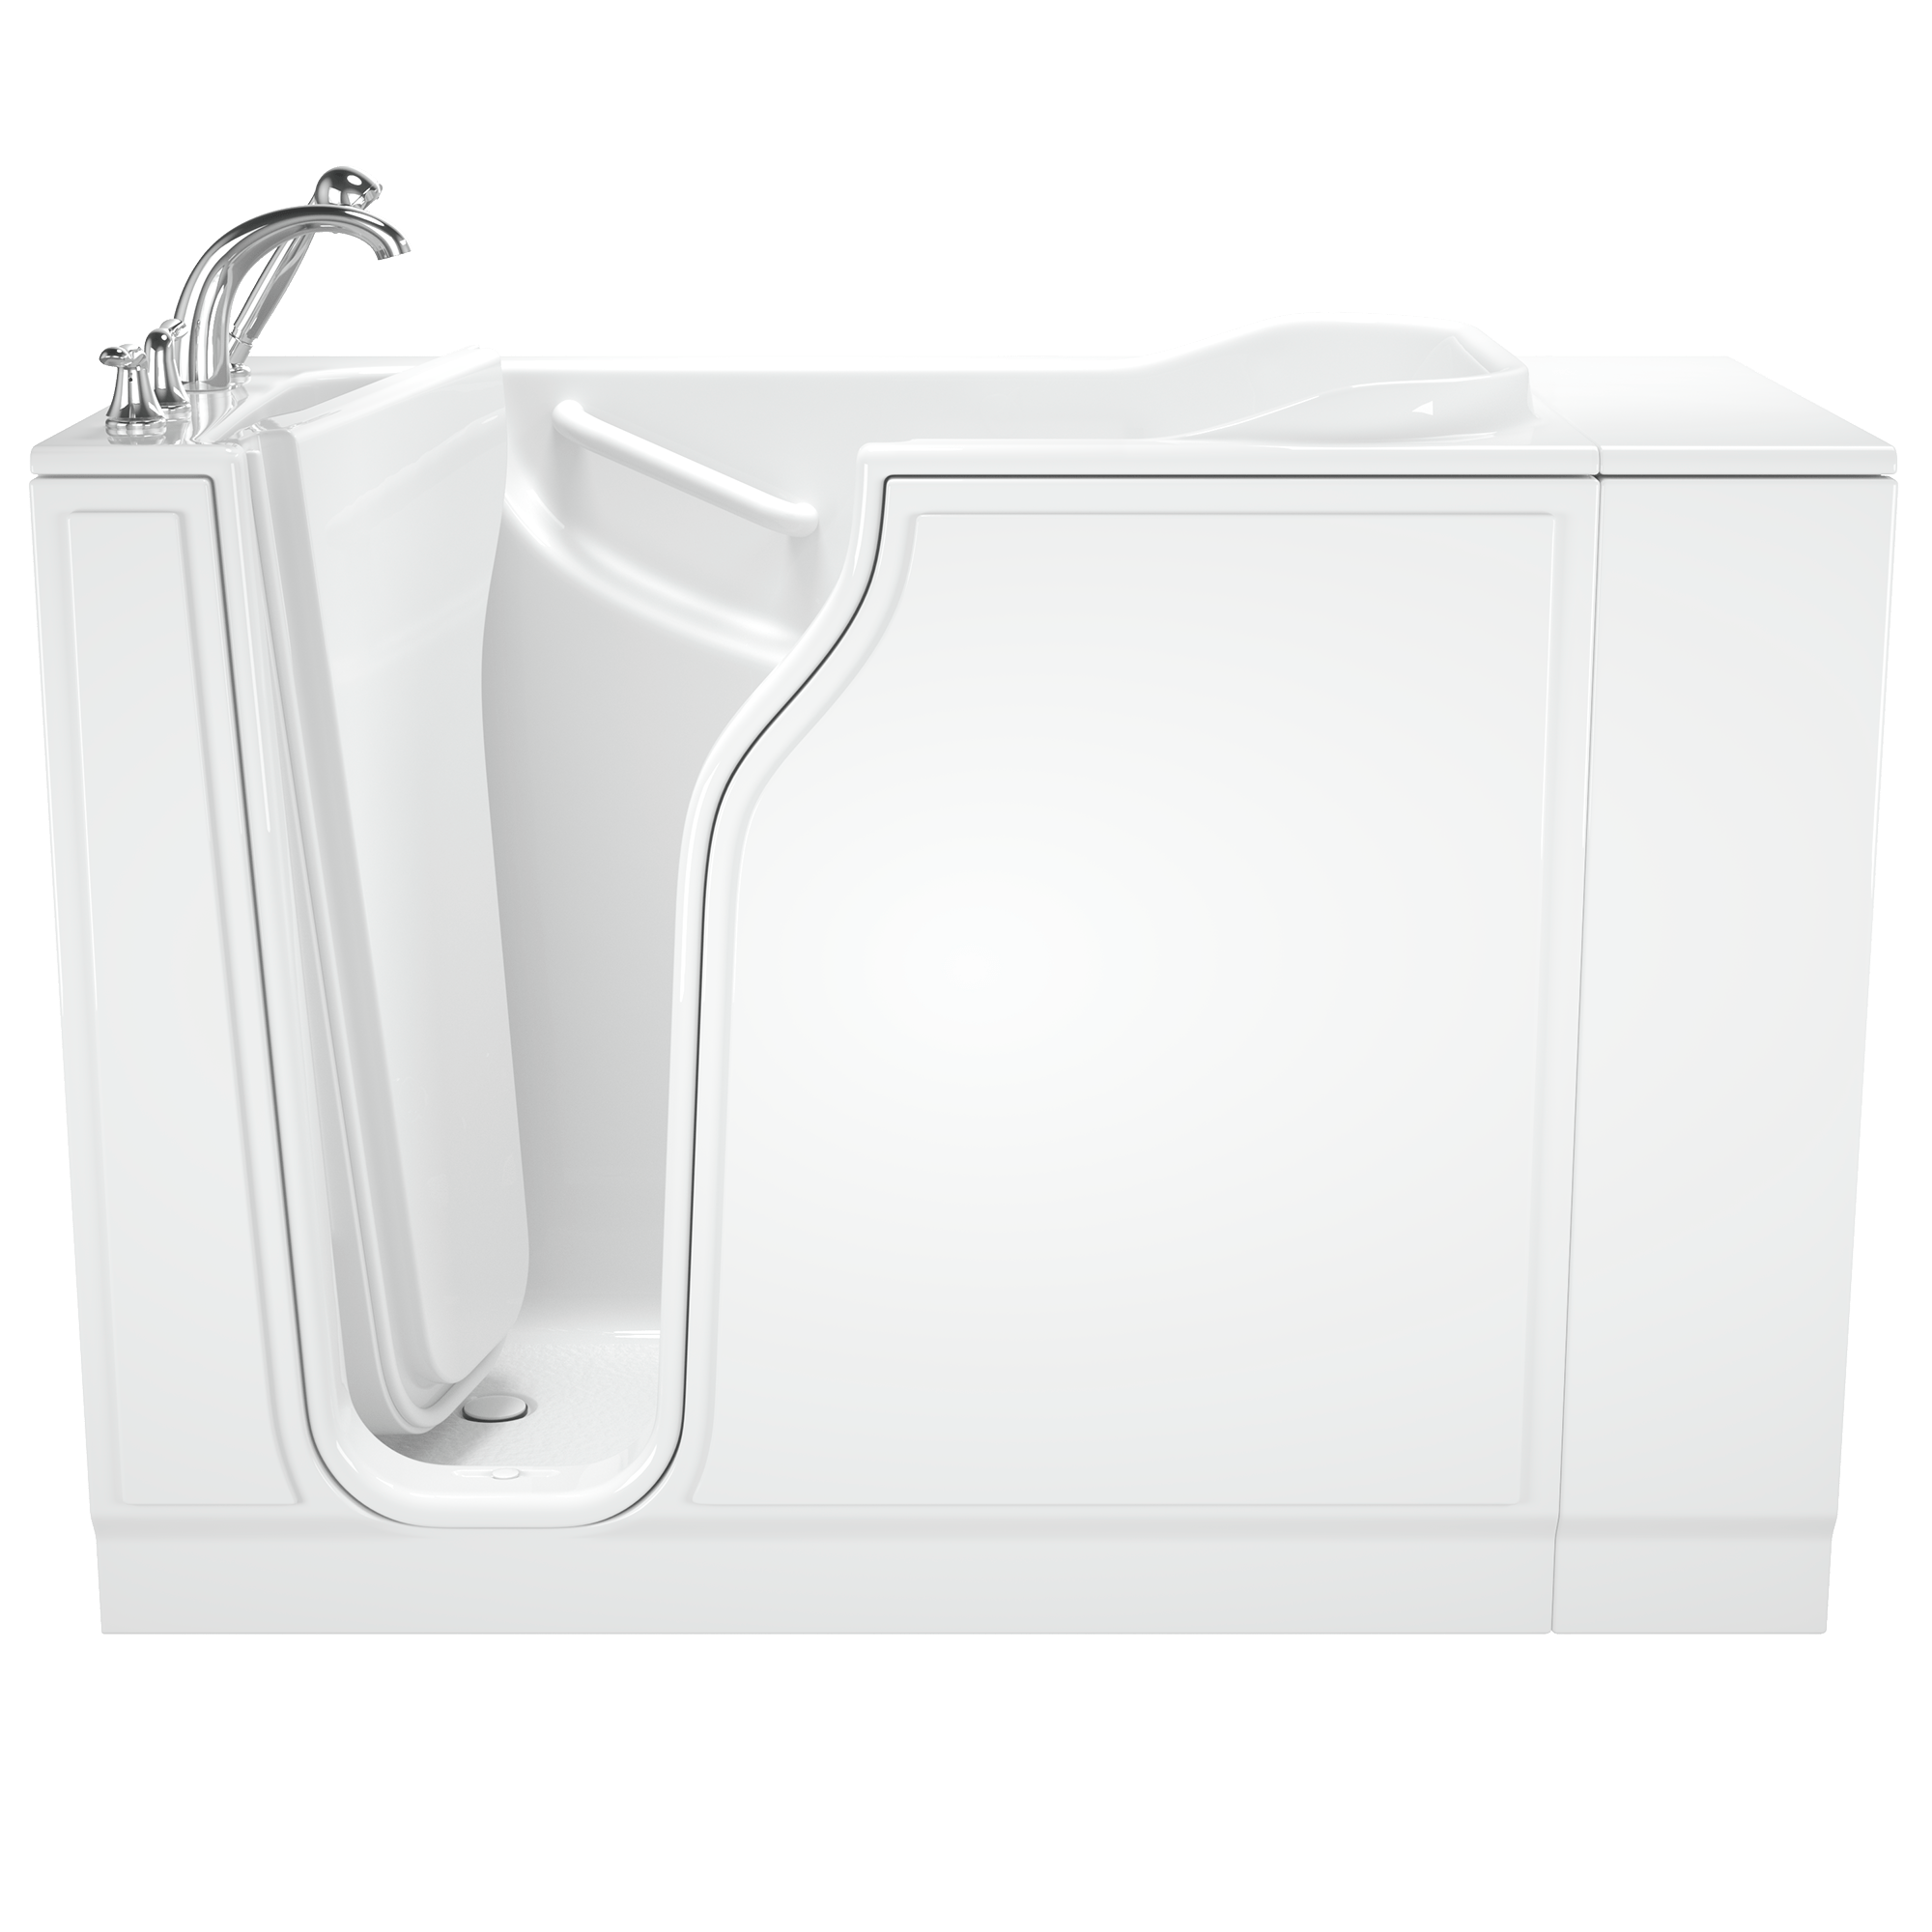 Gelcoat Entry Series 52 x 30-Inch Walk-In Tub With Soaker System – Left-Hand Drain With Faucet